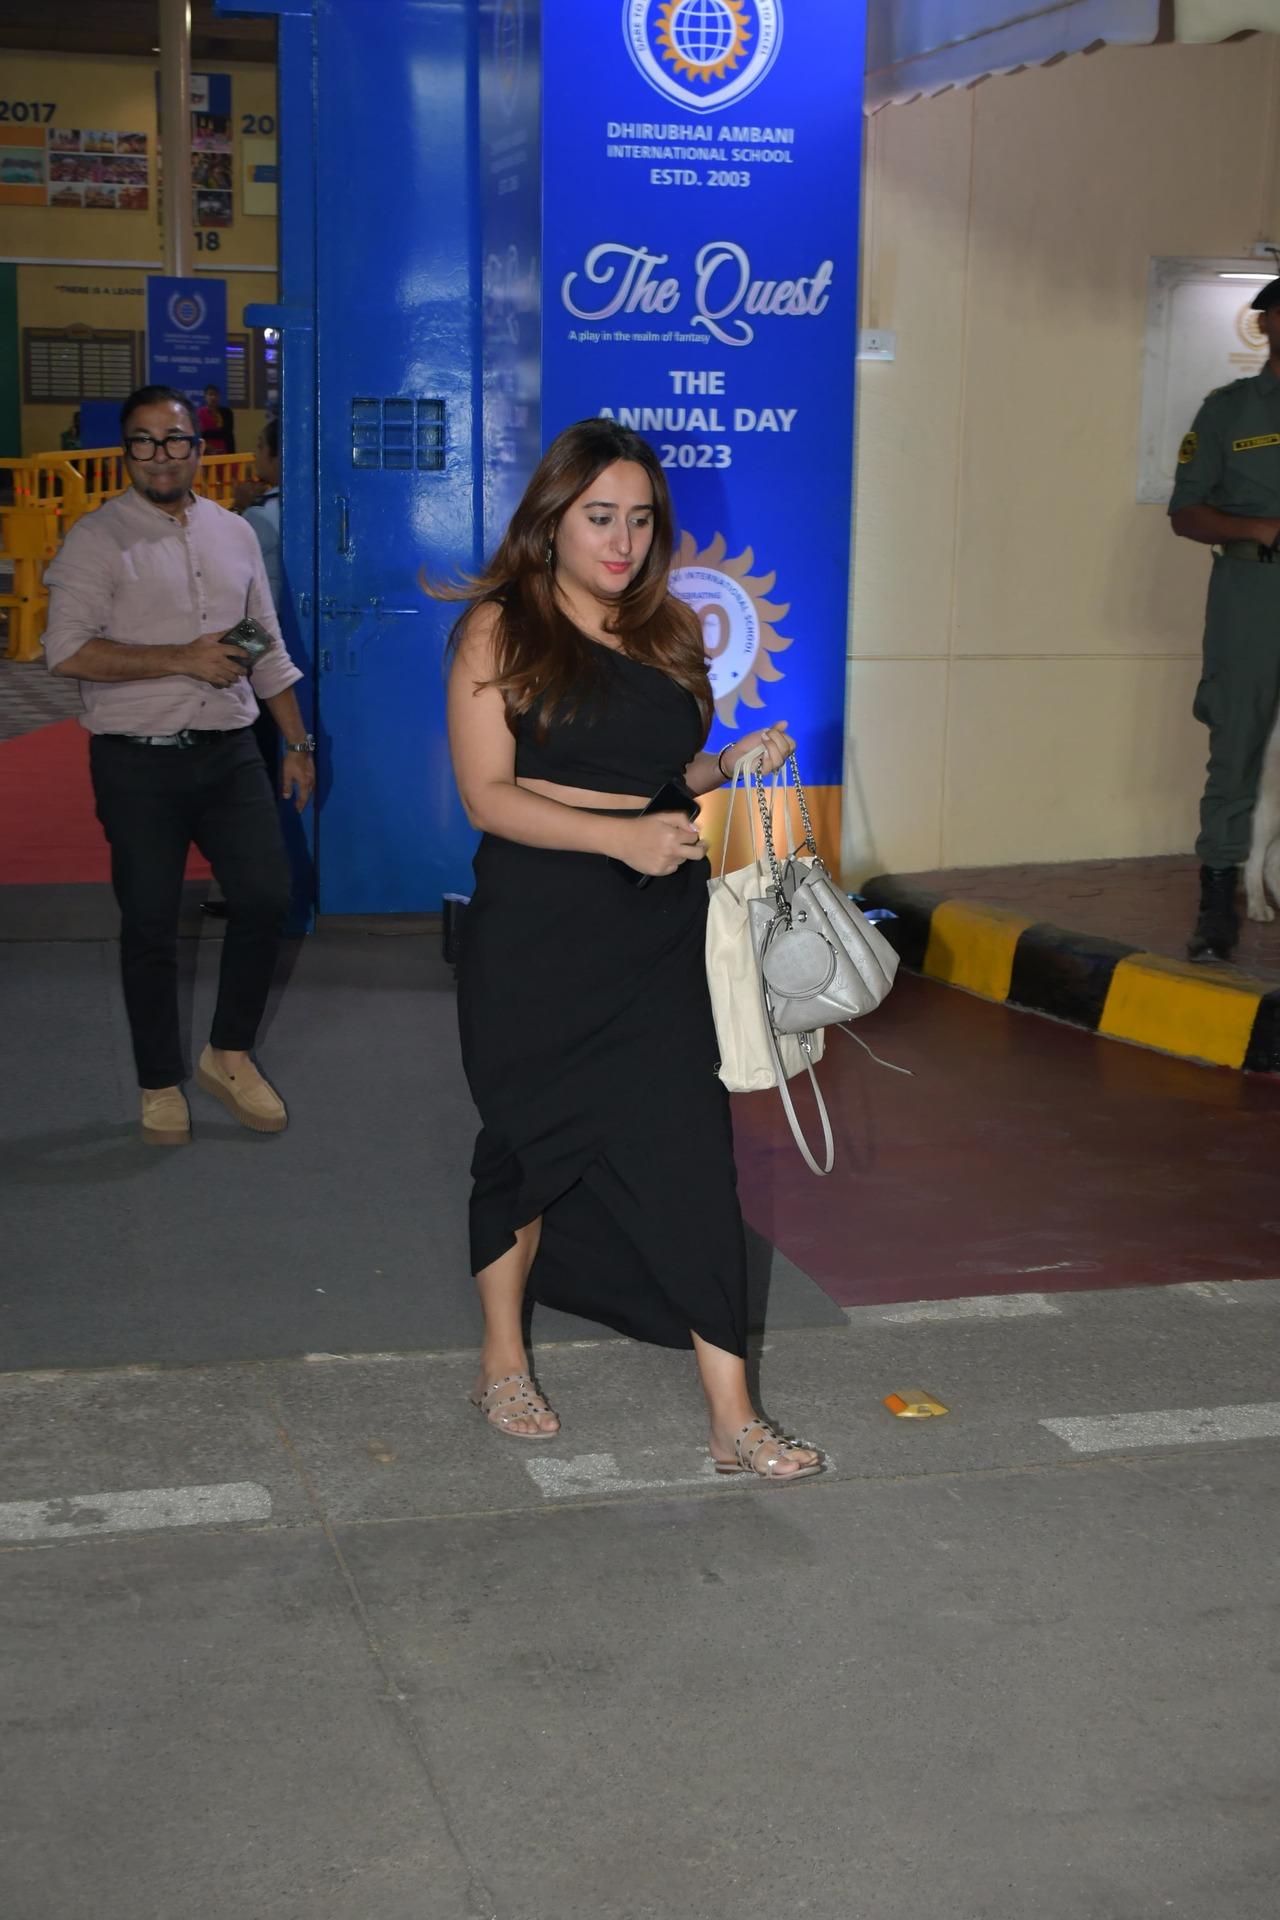 Varun Dhawan's wife Natasha Dalal was also spotted at the school event